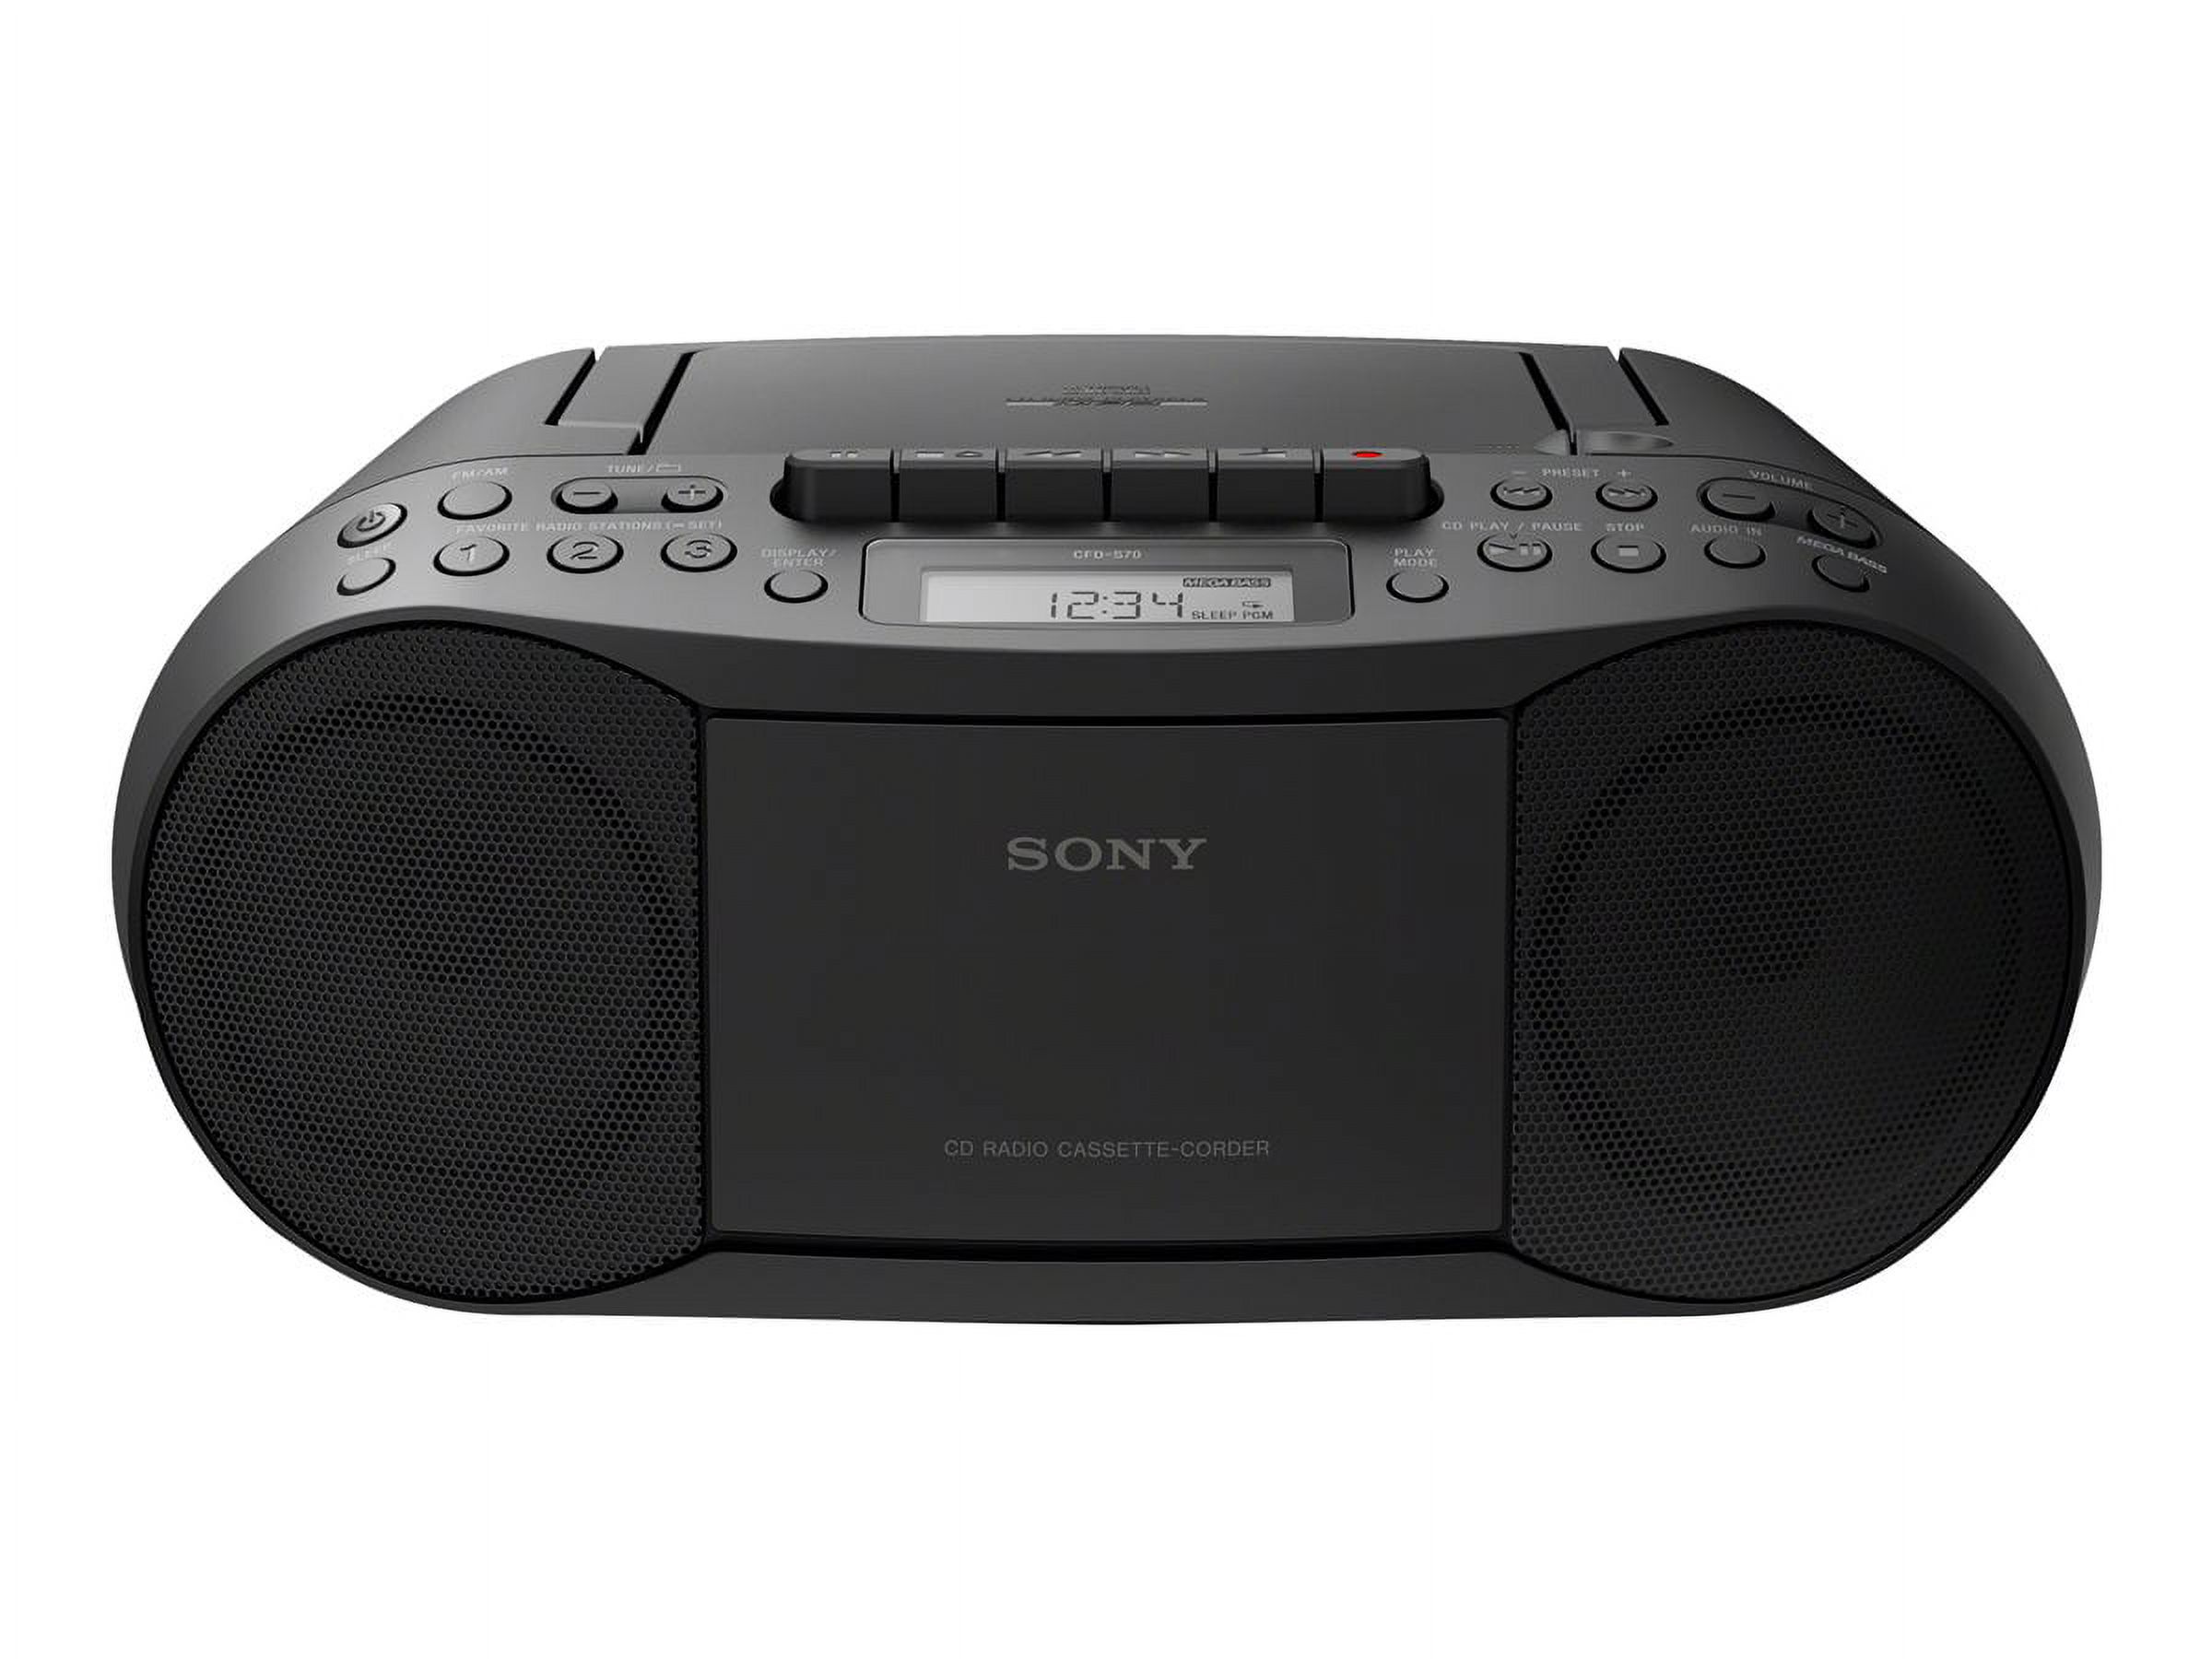 Sony CD/Cassette Boombox with Radio - 1 x Disc - 3.40 W Integrated Stereo Speaker - Black LCD - CD-DA, MP3 - 1.60 MHz AM - 108 MHz FM - 1.60 MHz MW - Auxiliary Input - image 1 of 5